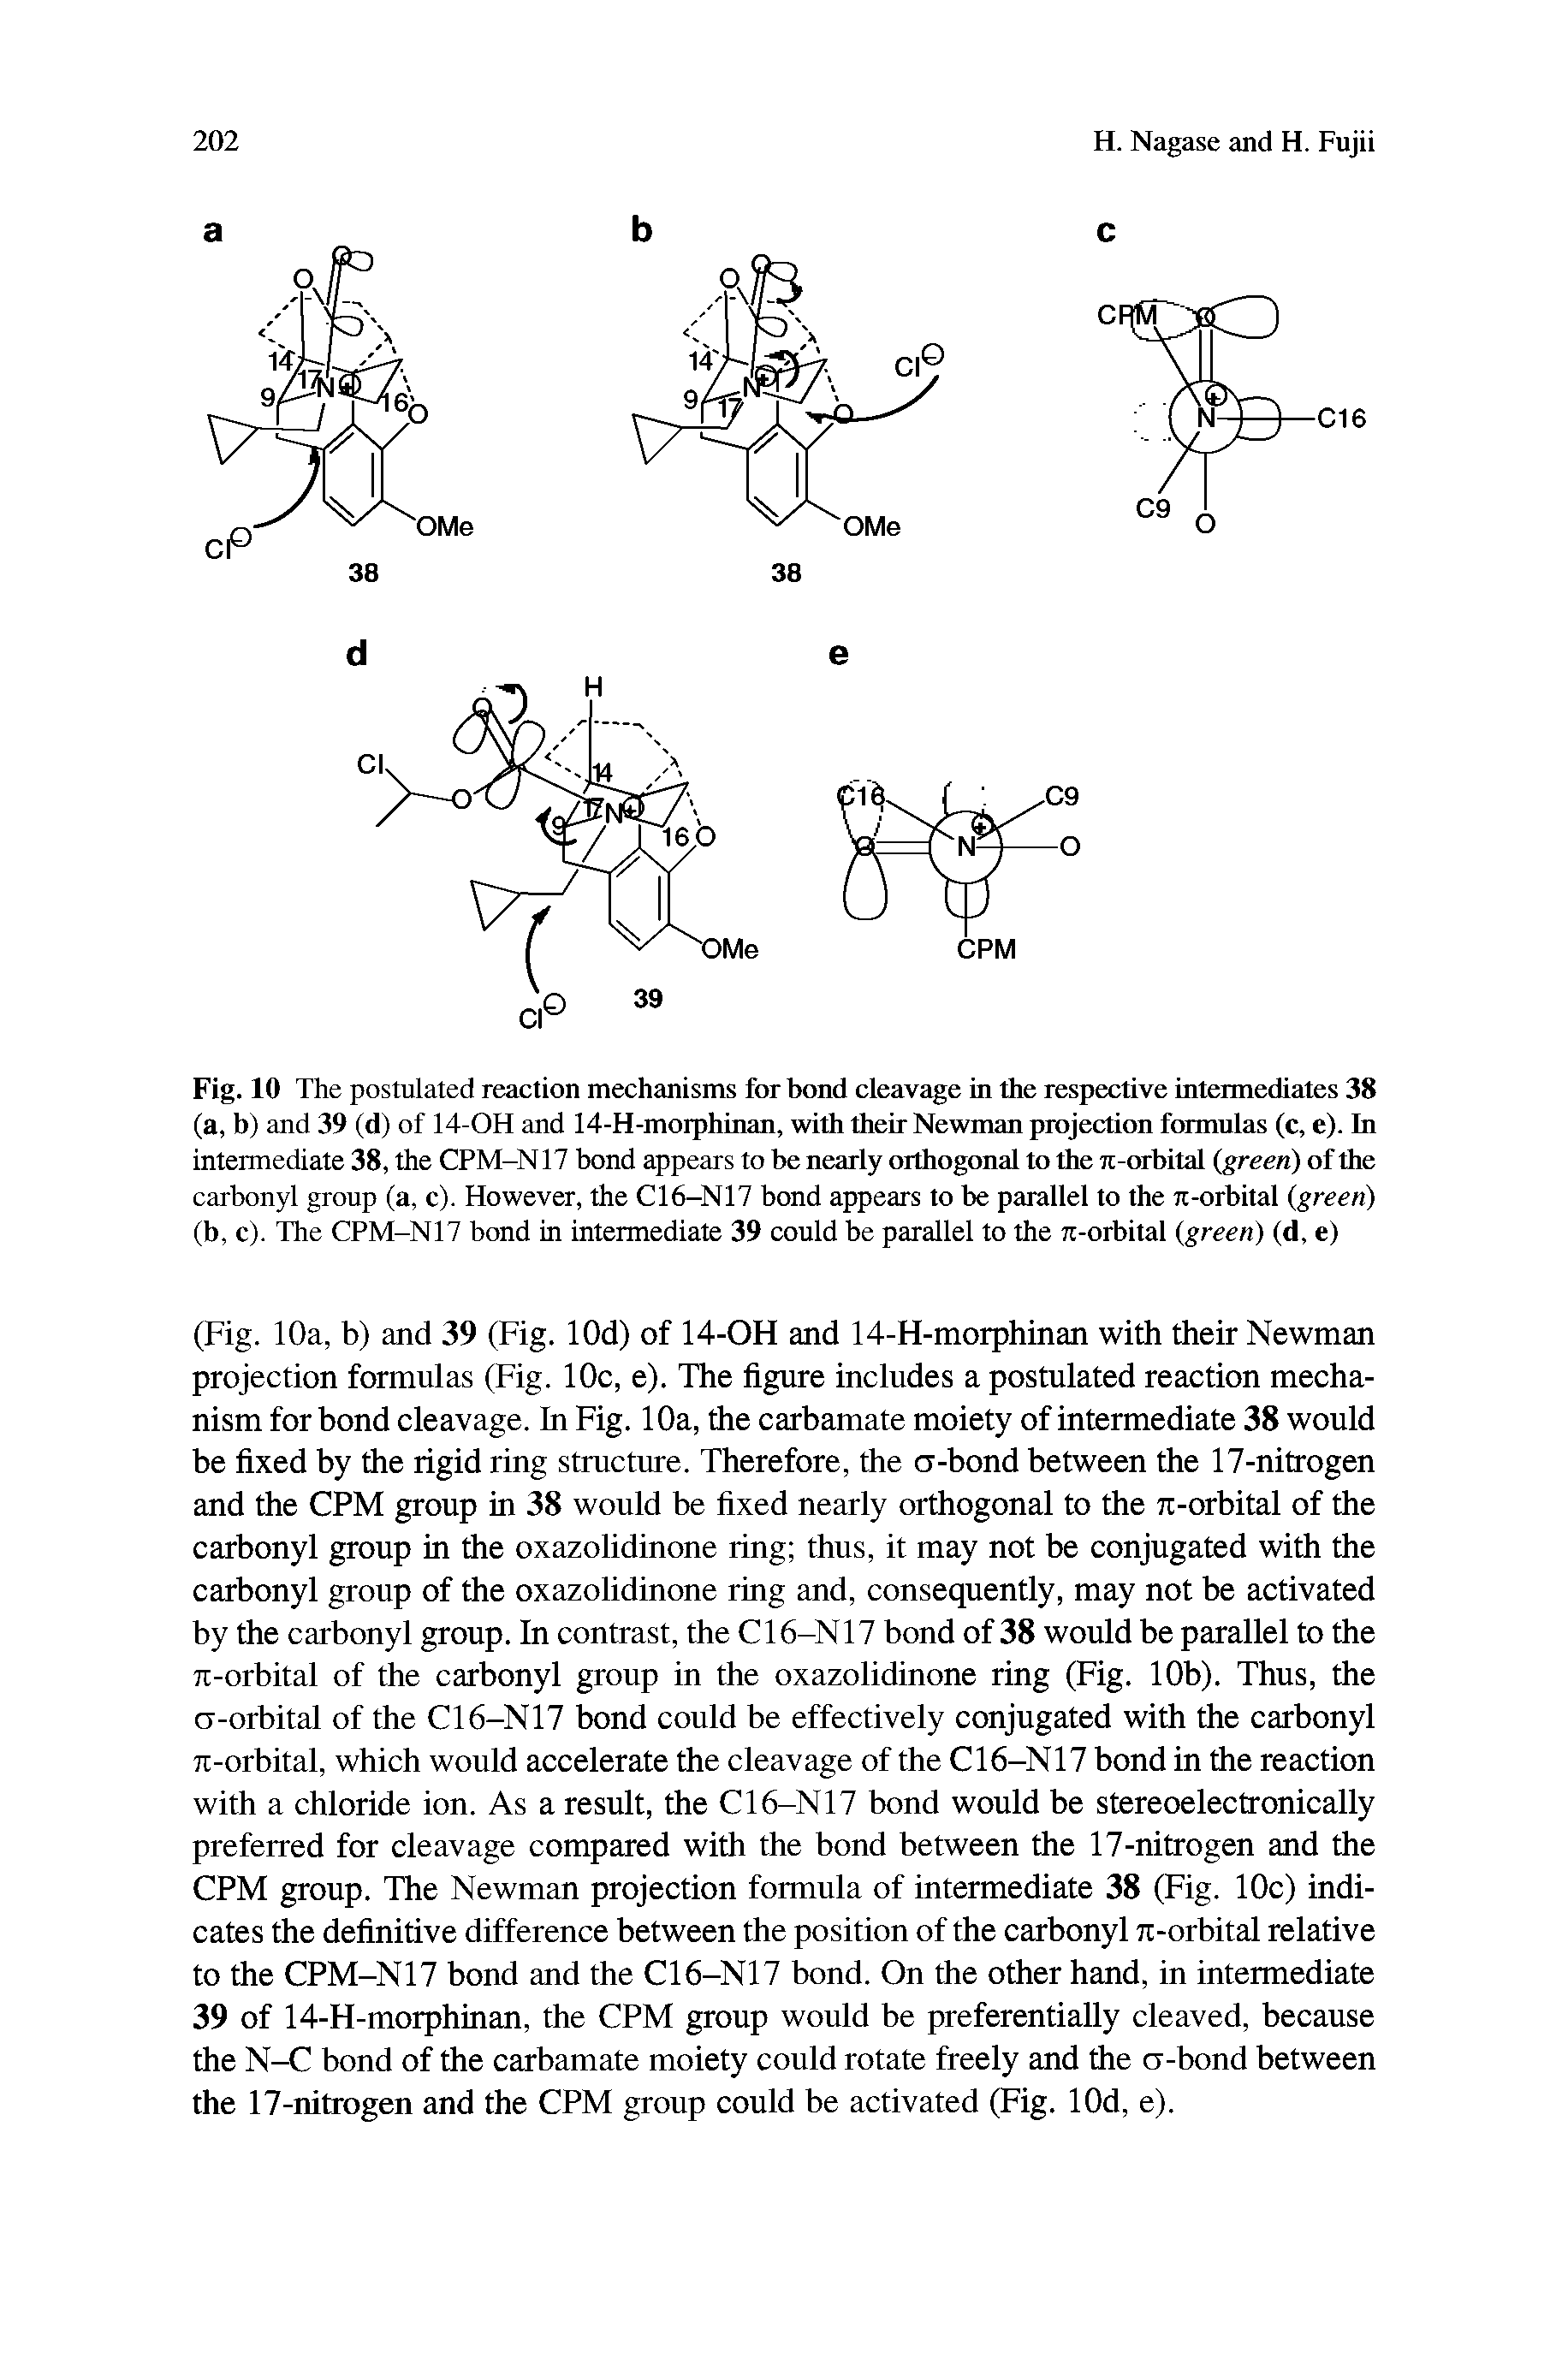 Fig. 10 The postulated reaction mechanisms for bond cleavage in the respective intermediates 38 (a, b) and 39 (d) of 14-OH and 14-H-morphinan, with their Newman projection formulas (c, e). In intermediate 38, the CPM-N17 bond appears to be nearly orthogonal to the 7i-orbital (green) of the carbonyl group (a, c). However, the C16-N17 bond appears to be parallel to the 7t-orbital (green) (b, c). The CPM-N17 bond in intermediate 39 could be parallel to the 7i-orbital (green) (d, e)...